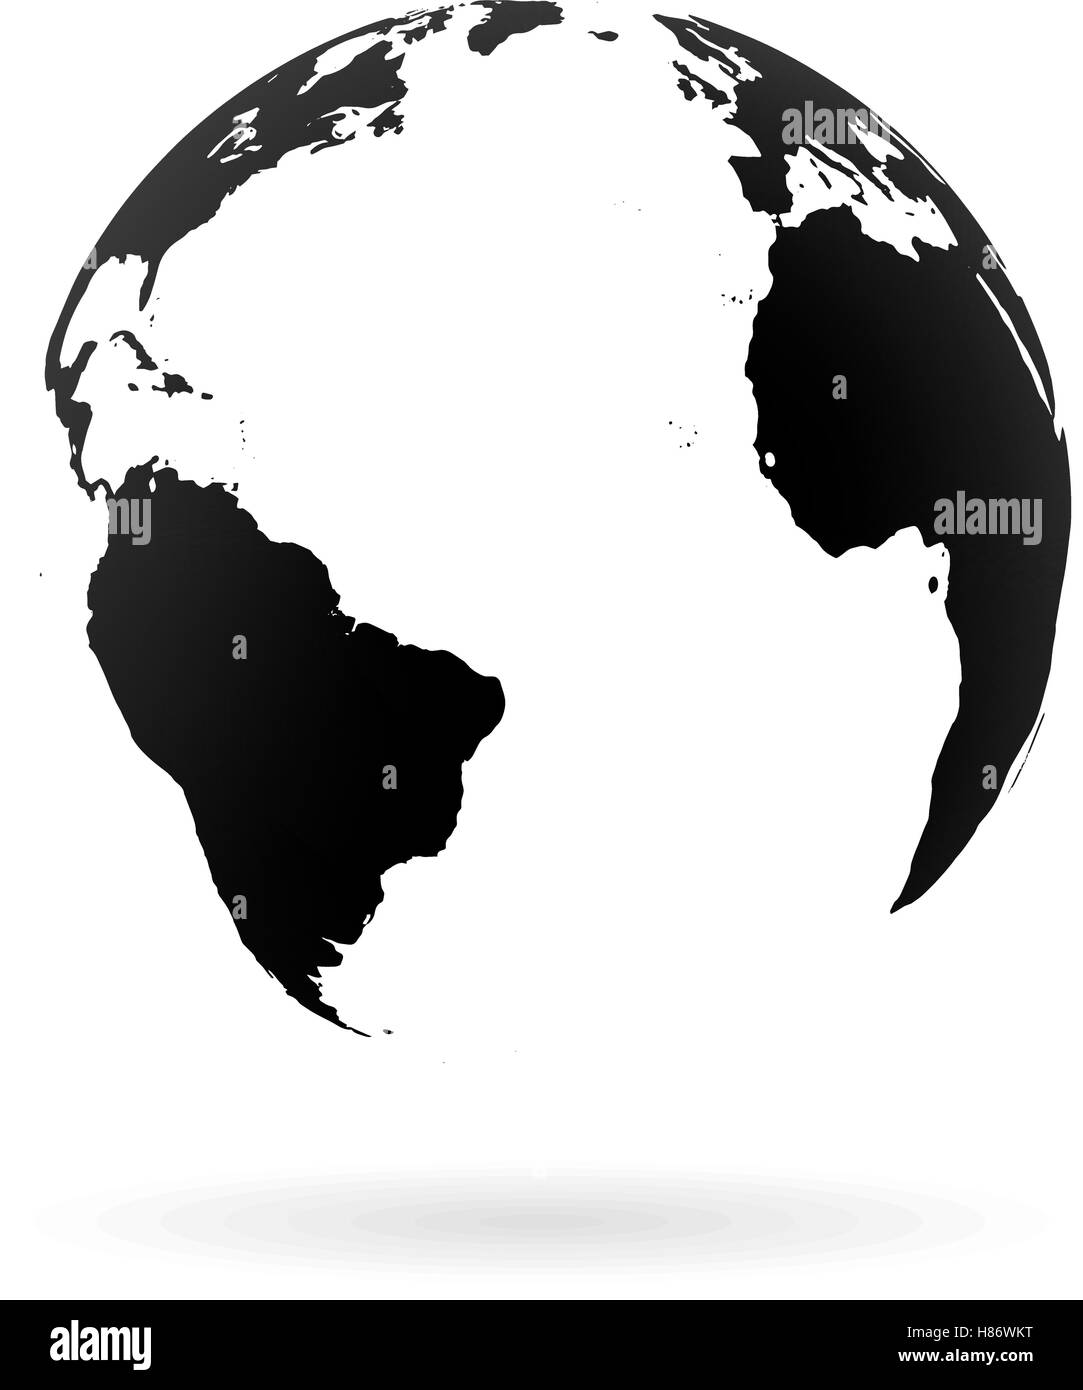 highly-detailed-earth-globe-symbol-north